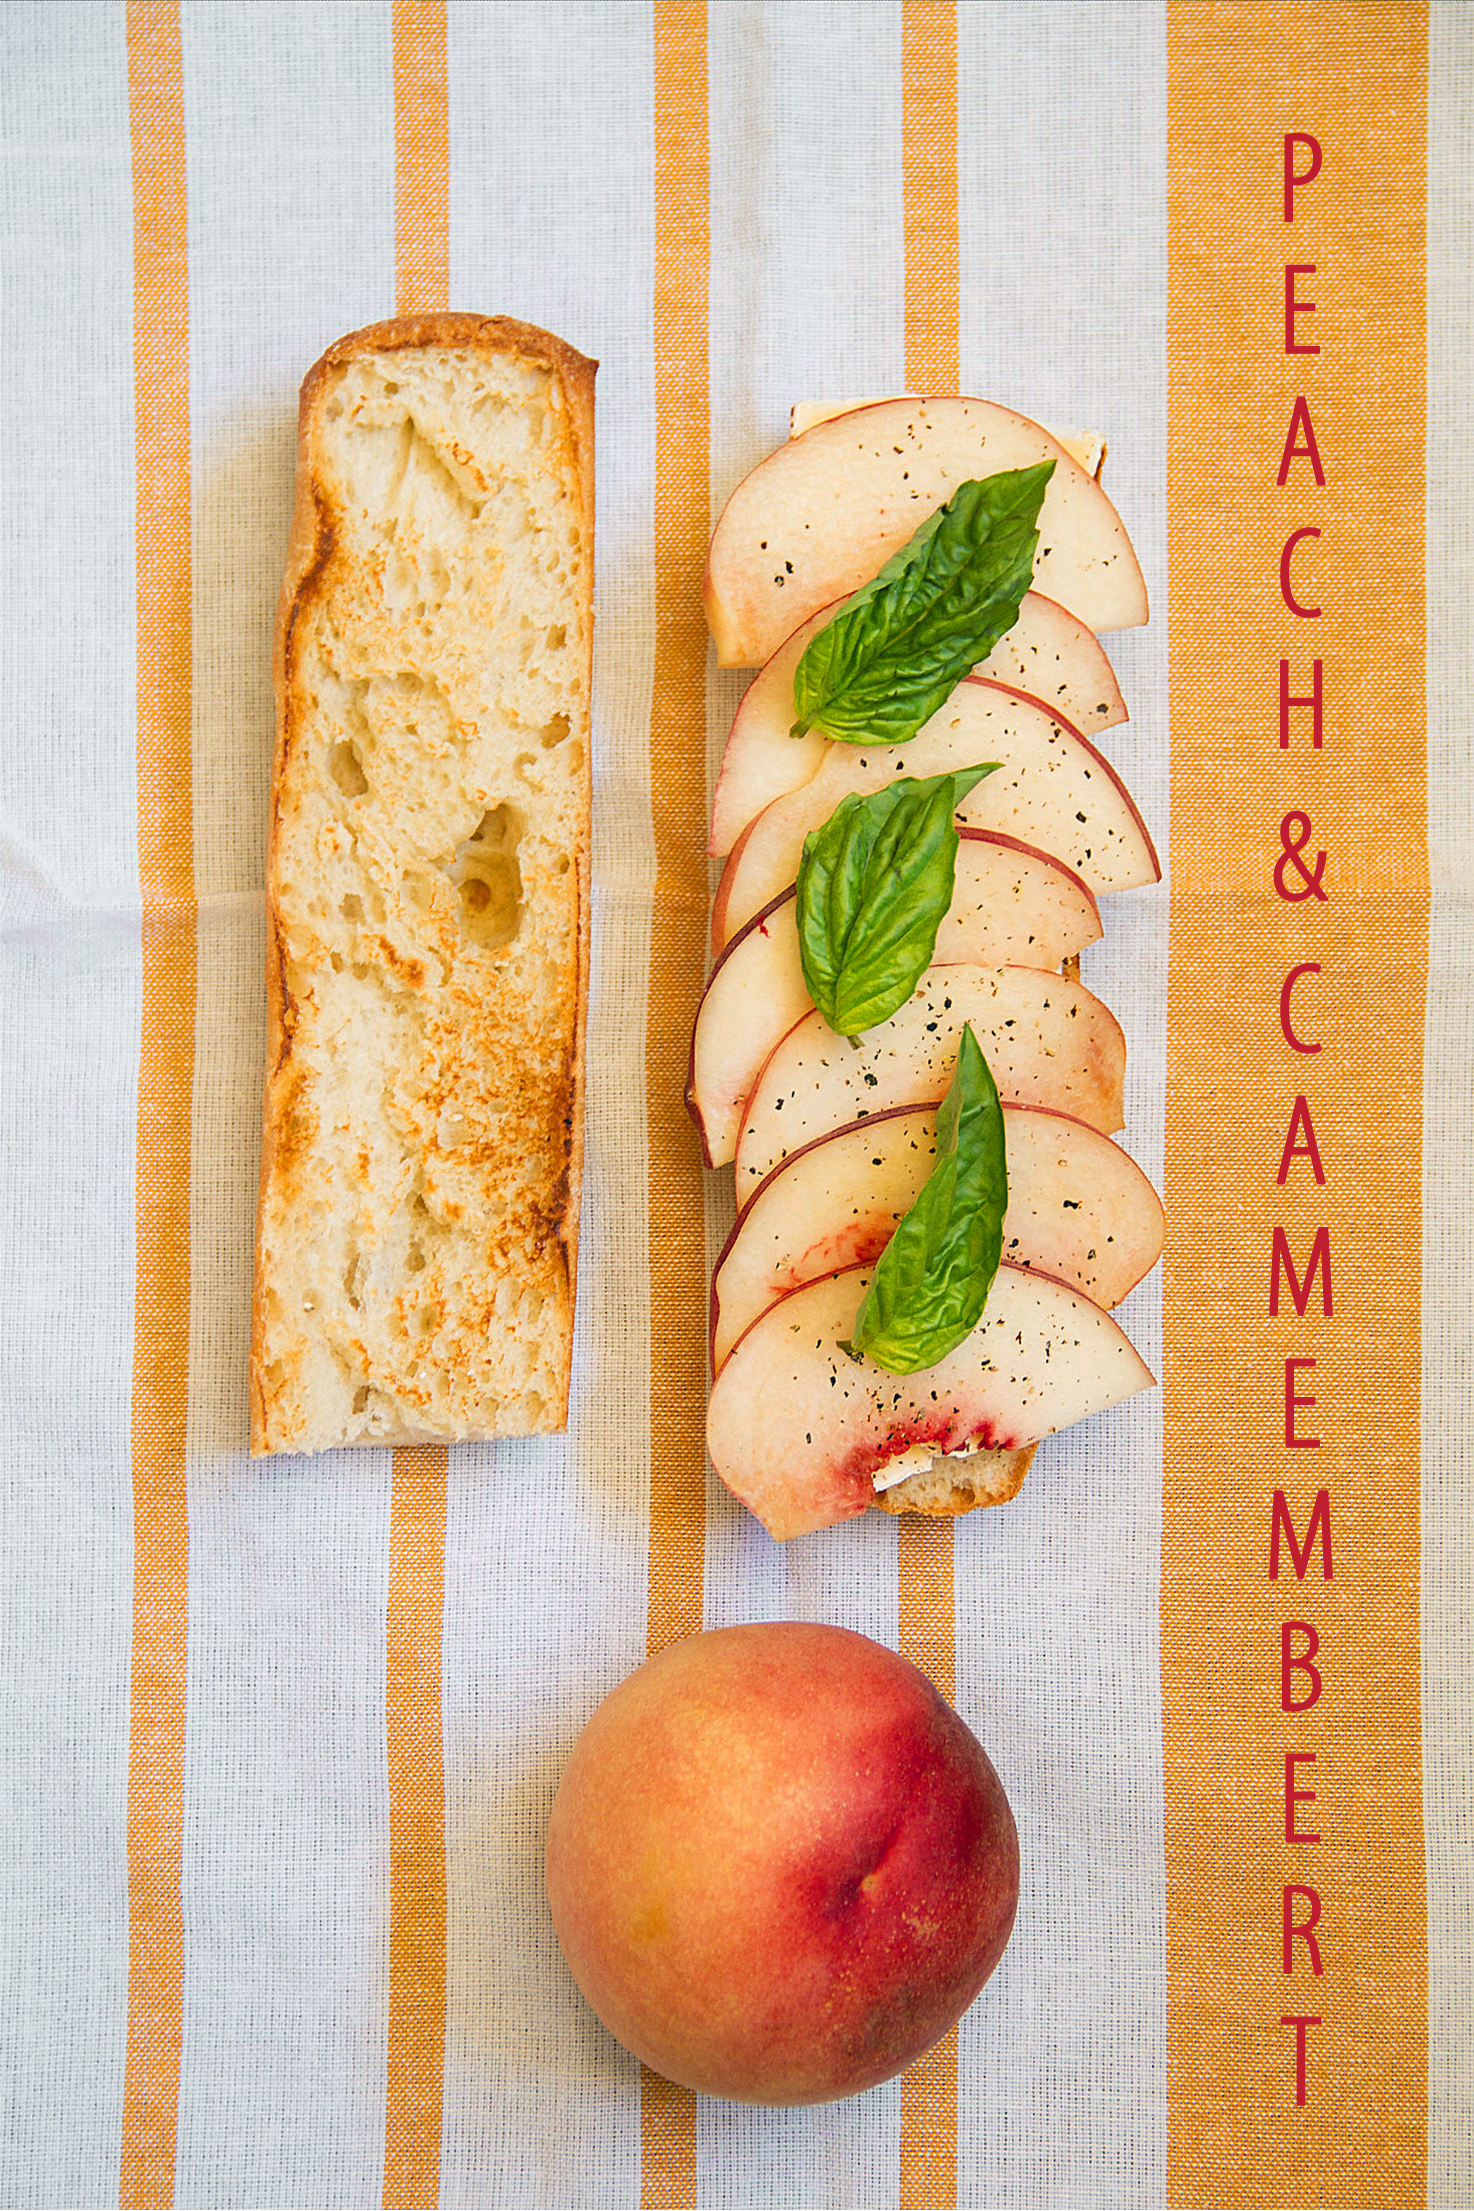 Peach and Camembert Baguette with Basil and Black Pepper.